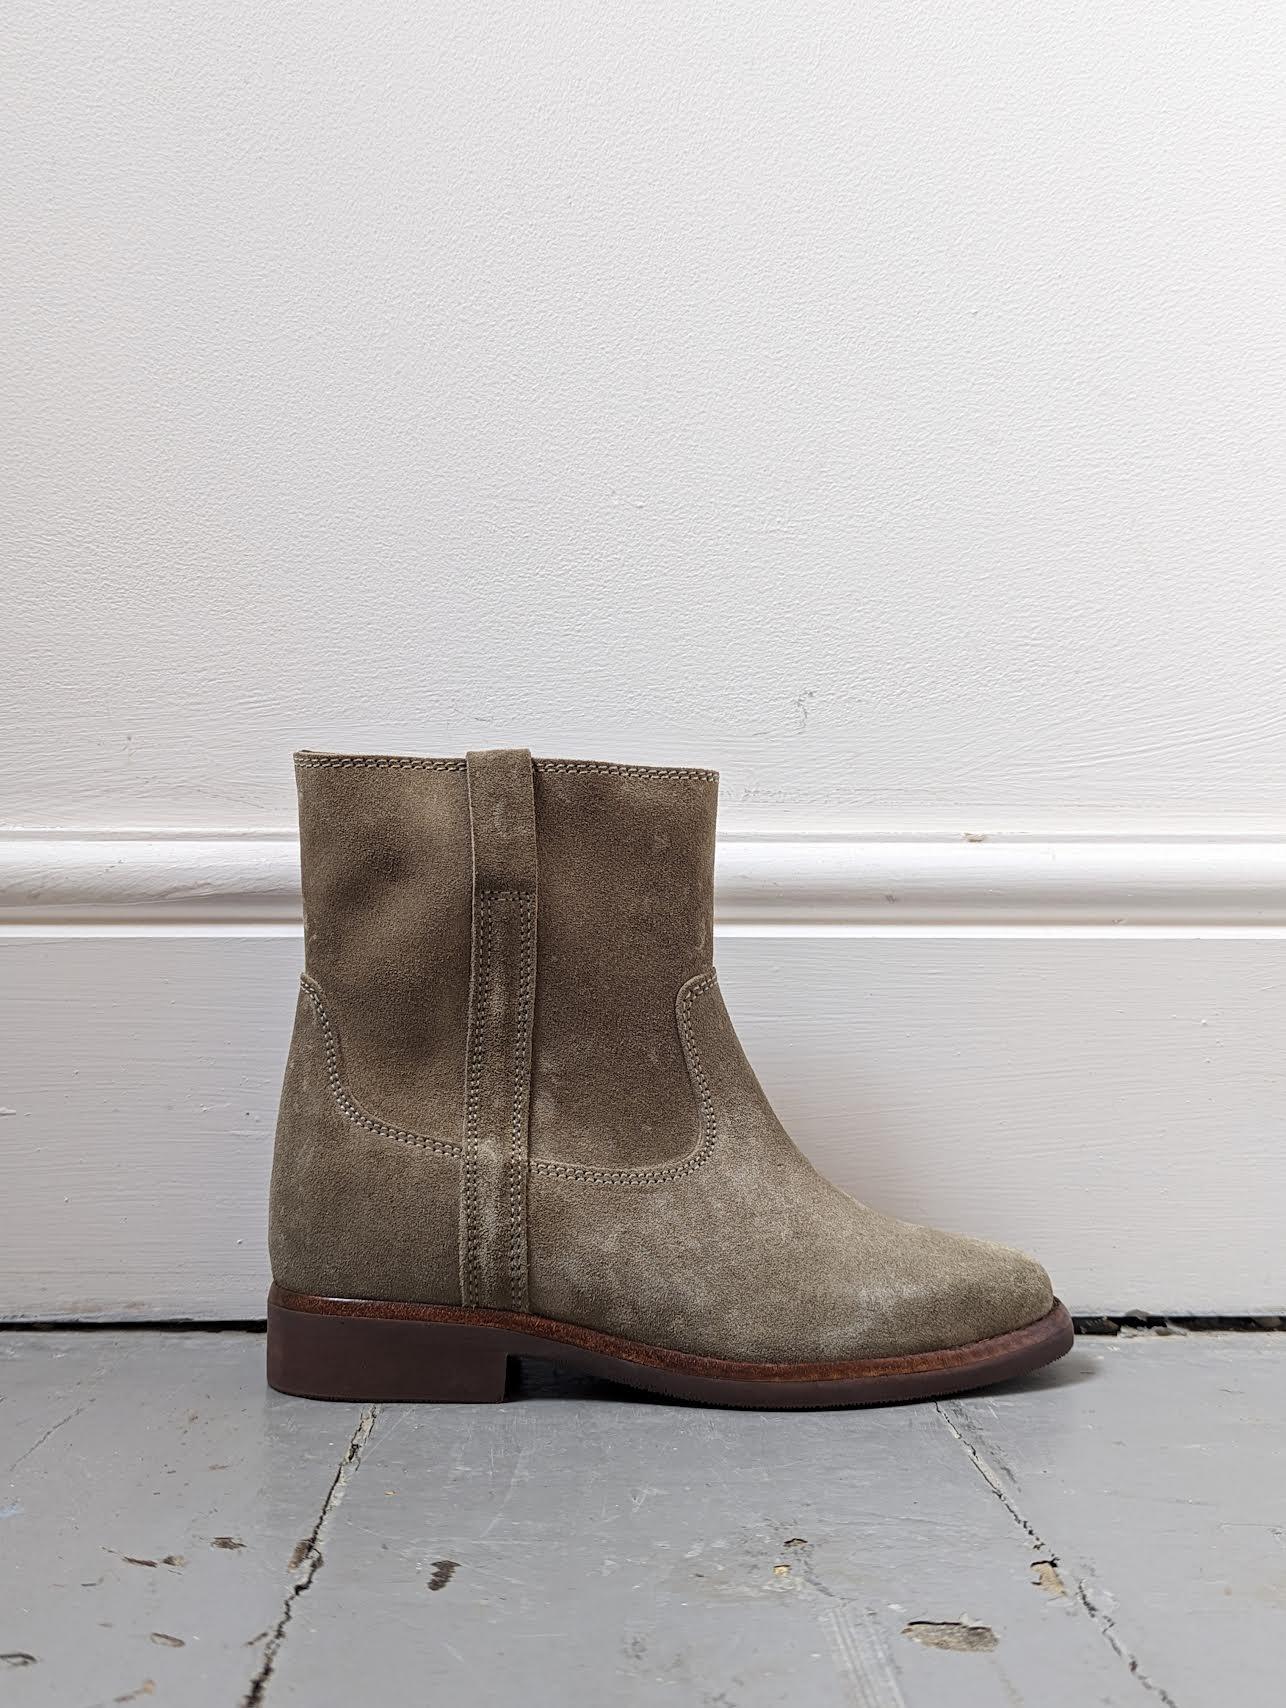 Marant Etoile - Susee Taupe Suede Ankle Boots - 32 The Guild